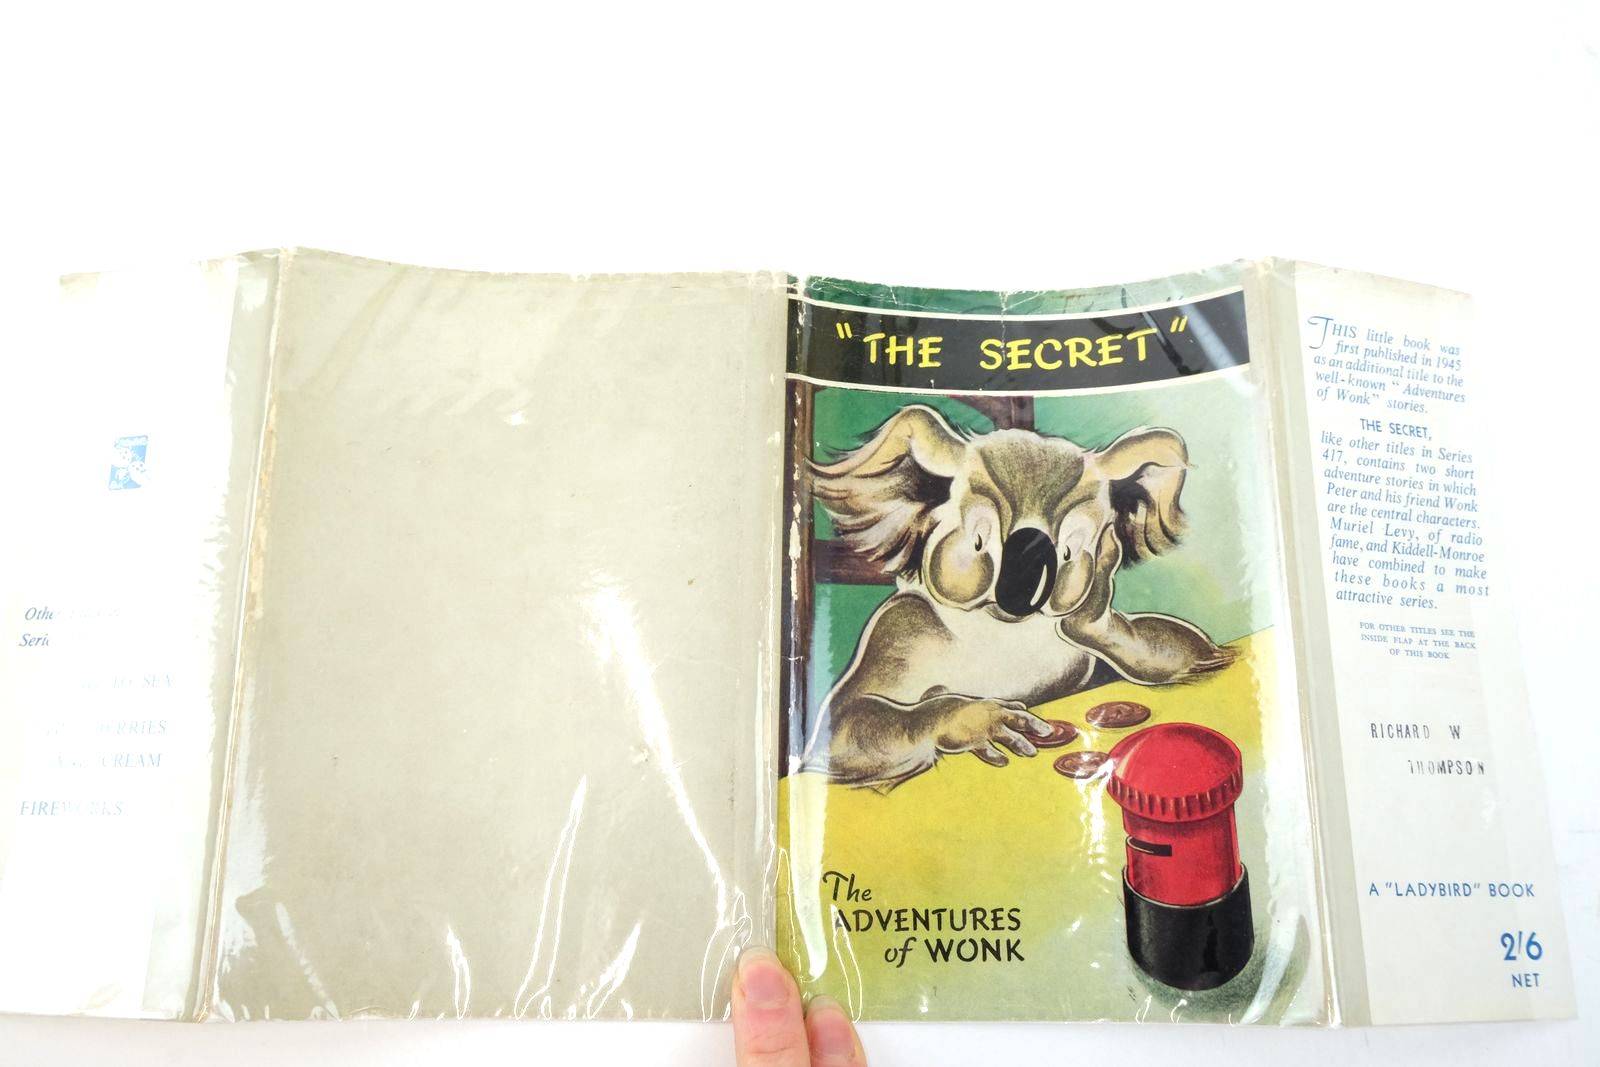 Photo of THE ADVENTURES OF WONK - THE SECRET written by Levy, Muriel illustrated by Kiddell-Monroe, Joan published by Wills & Hepworth Ltd. (STOCK CODE: 2136916)  for sale by Stella & Rose's Books